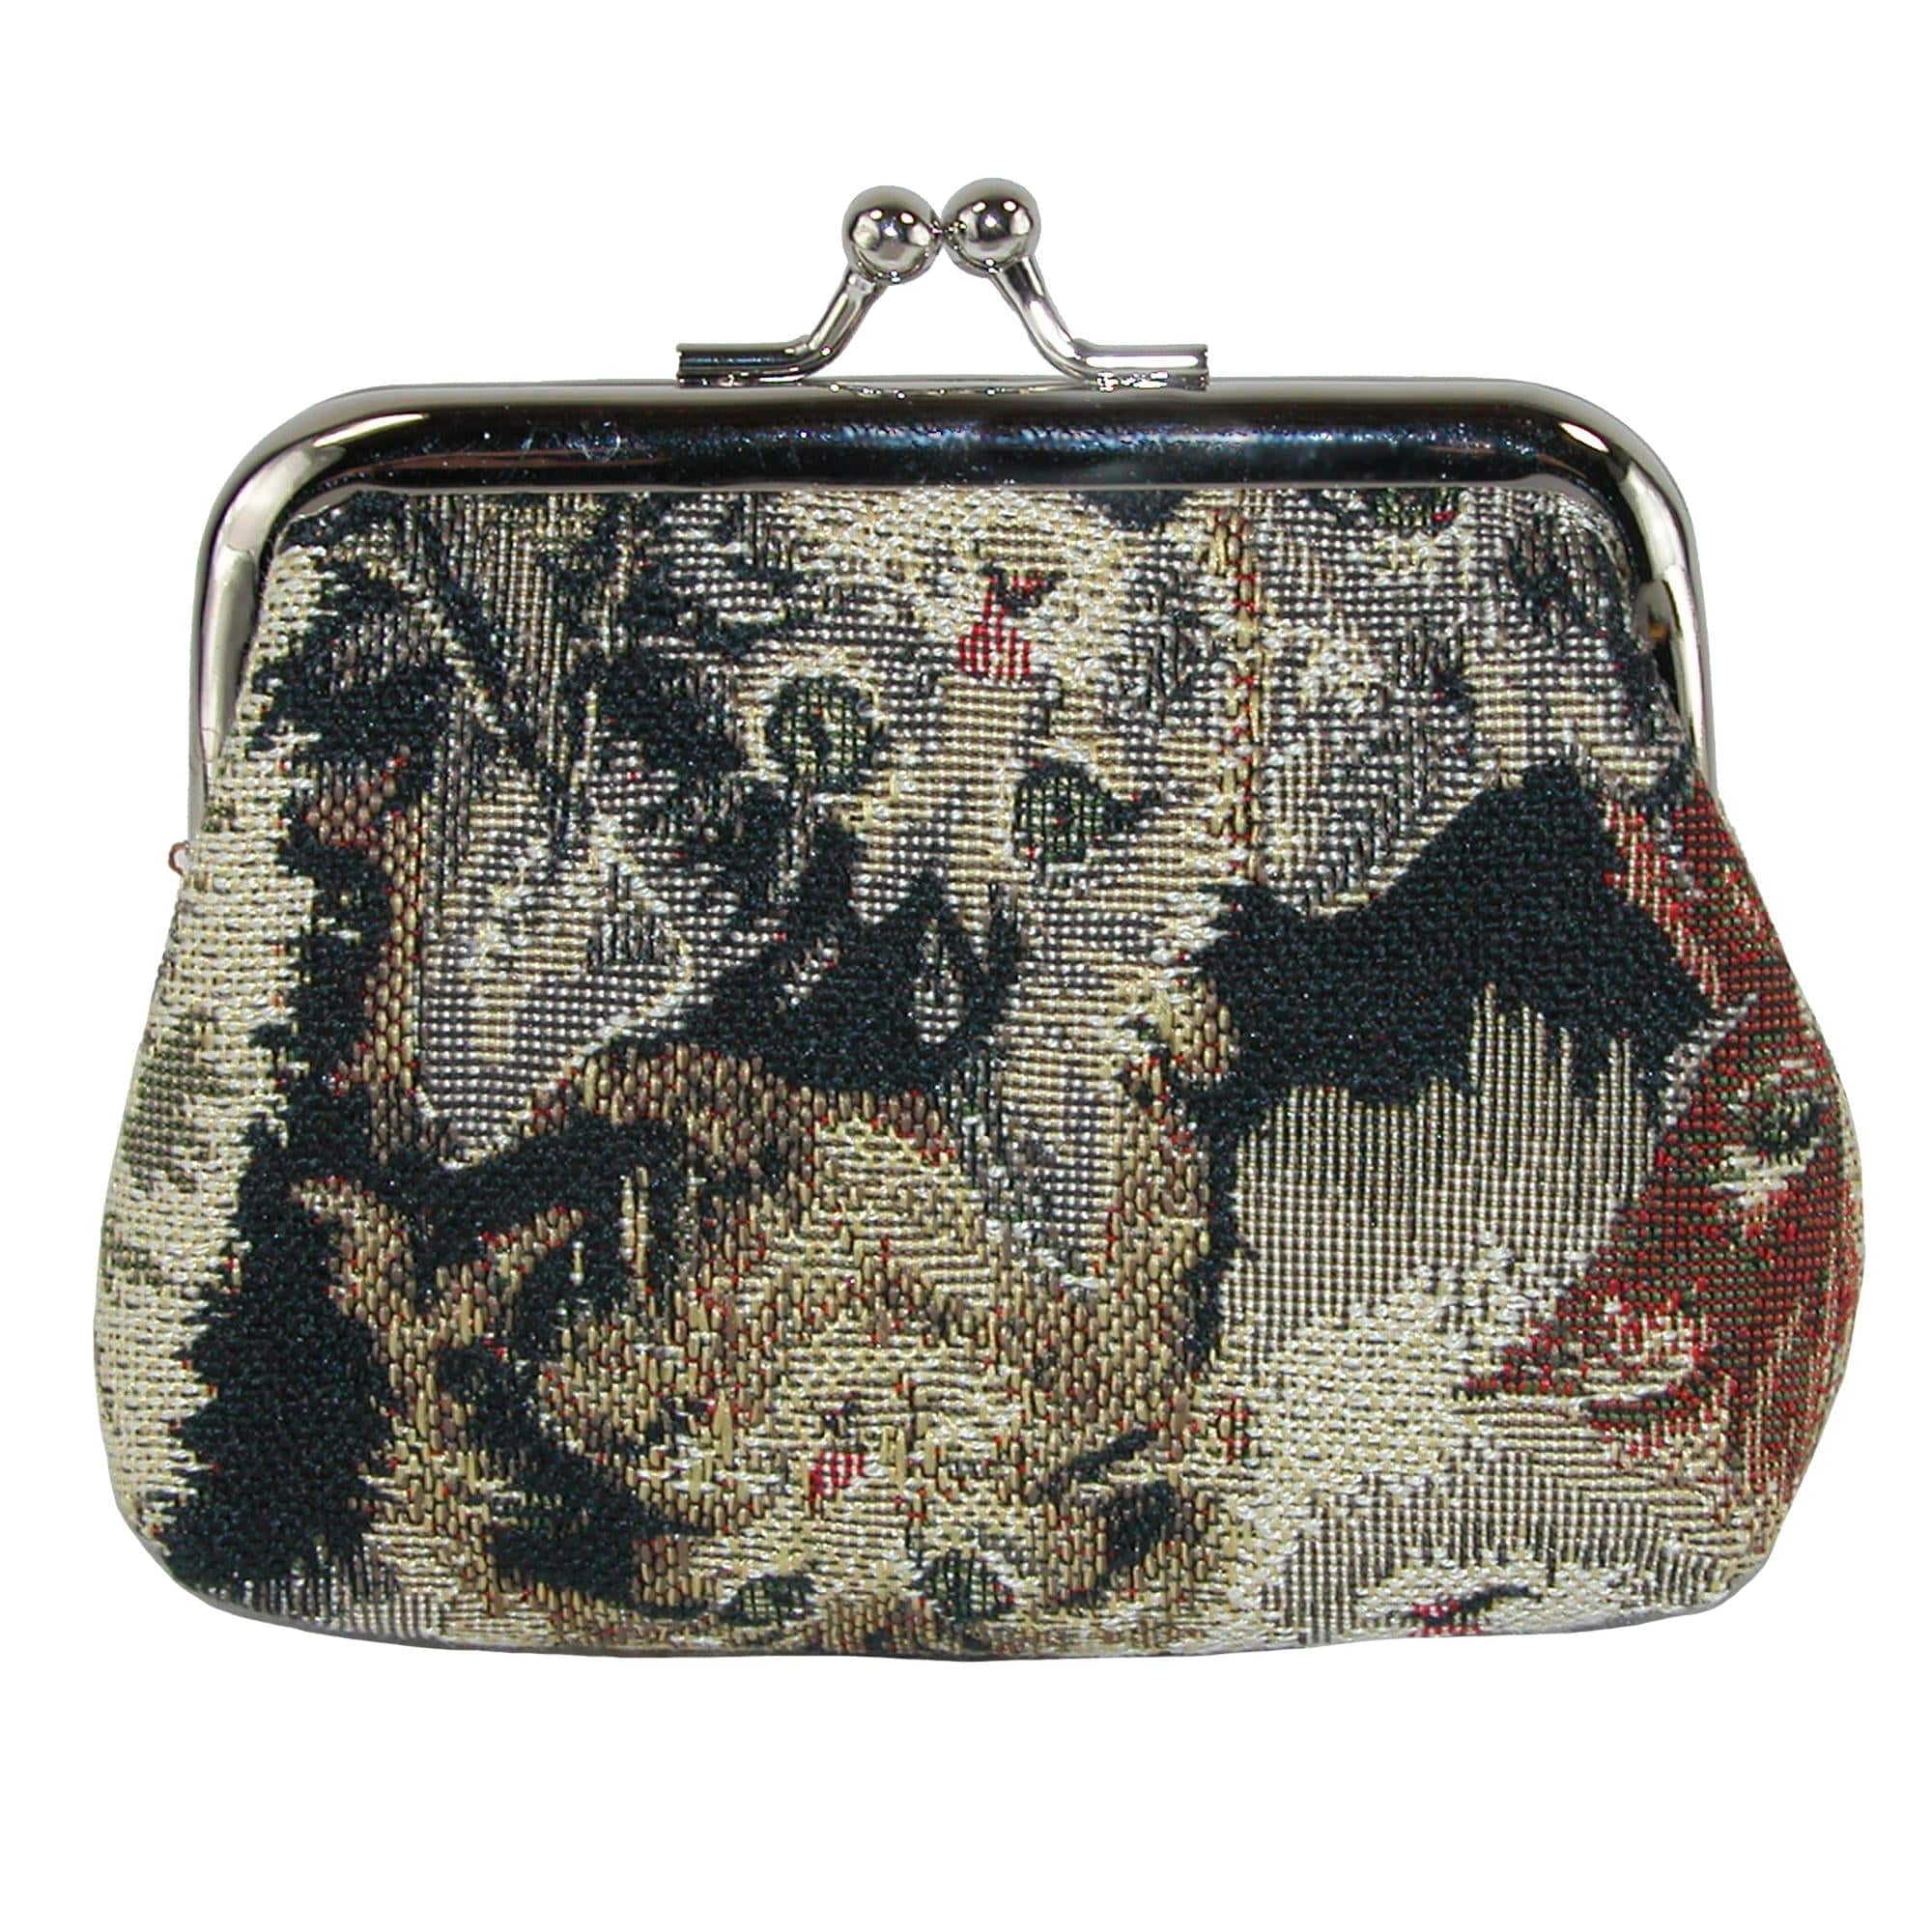 Amazon.com: Sainty 01 Blossom Coin Purse with One Compartment, Tapestry